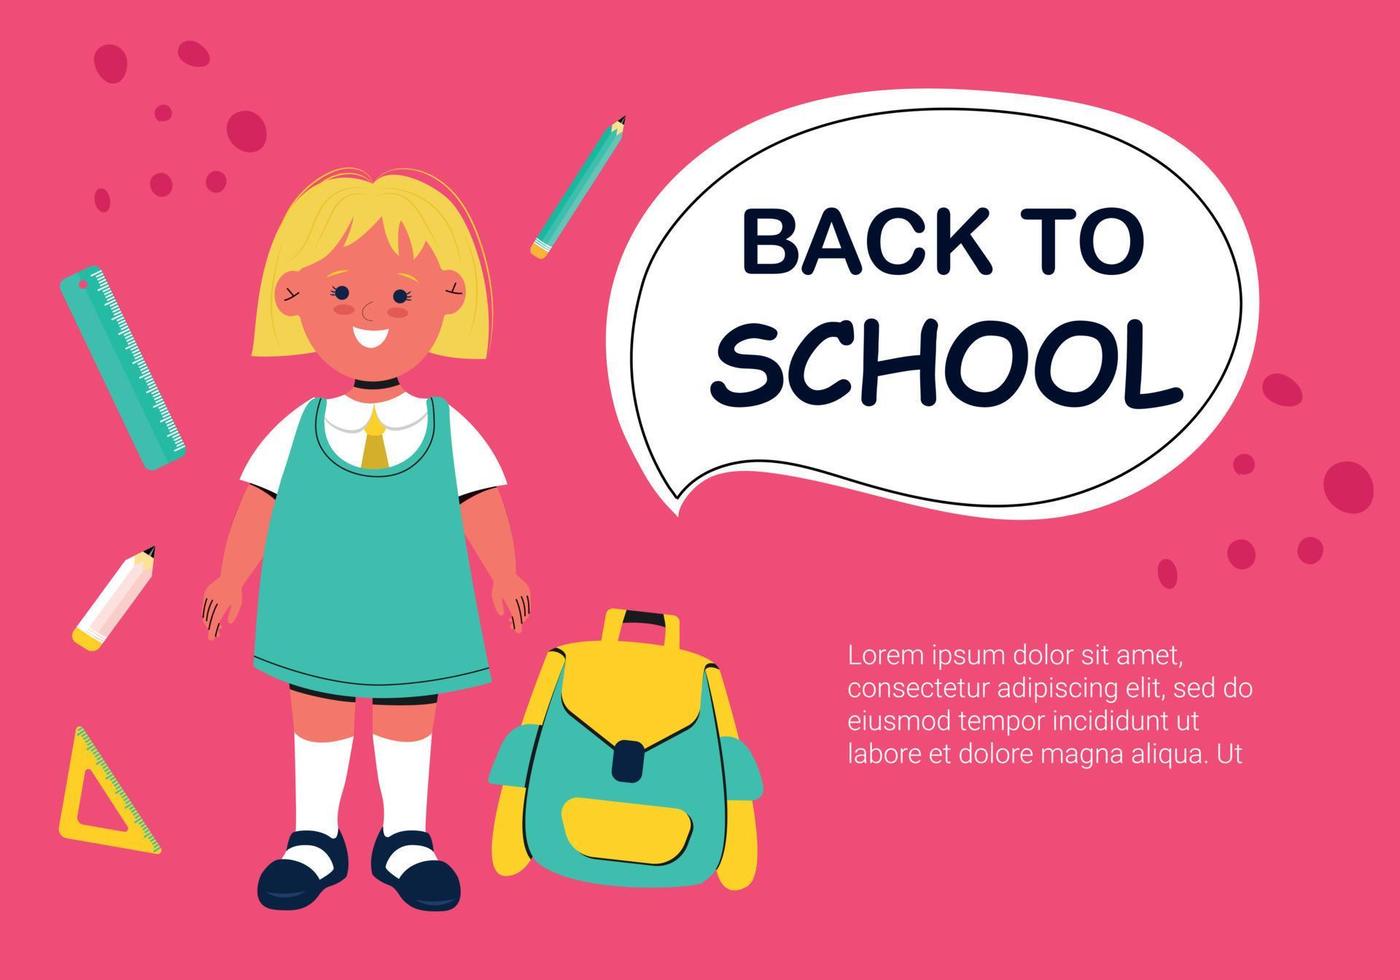 Banner Back to school with a smiling student and school supplies. Colorful back to school template for invitation, poster, banner, promotion, sale, etc. school supplies cartoon illustration. Vector